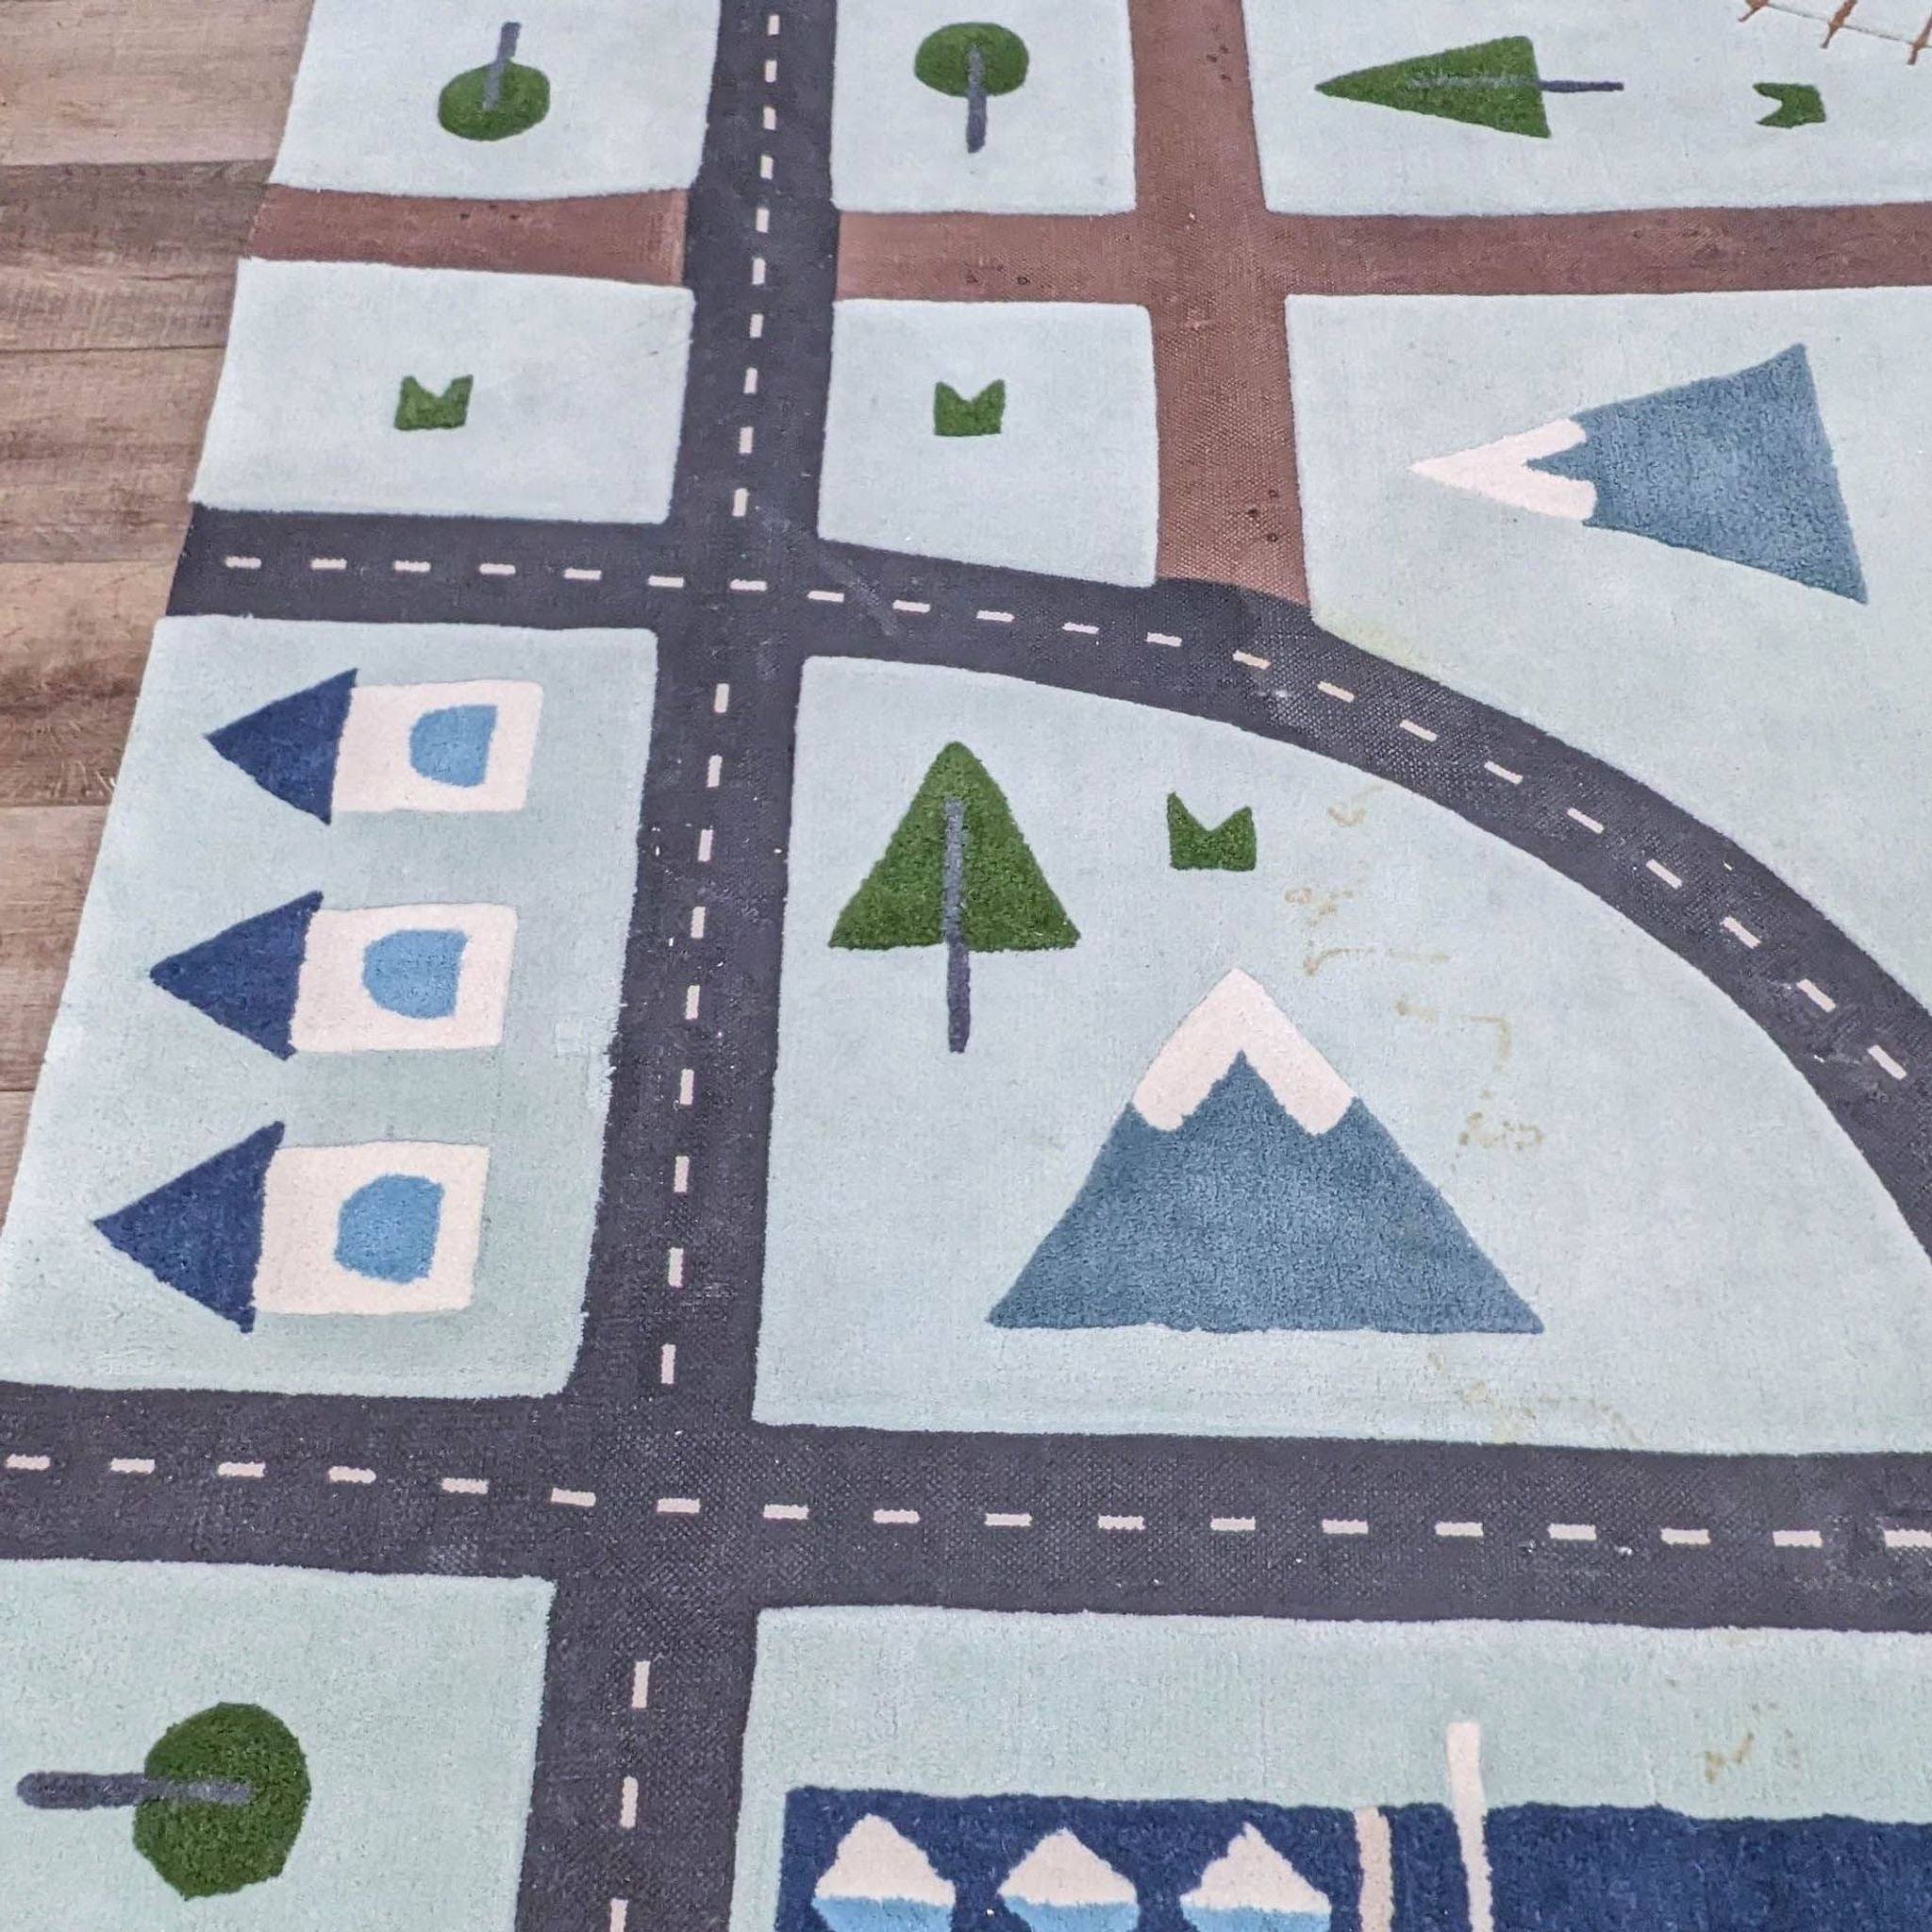 2. Close-up of Crate & Barrel's City Car Kids Area Rug showing detailed street design and textured wool, perfect for children's imaginative playtime.